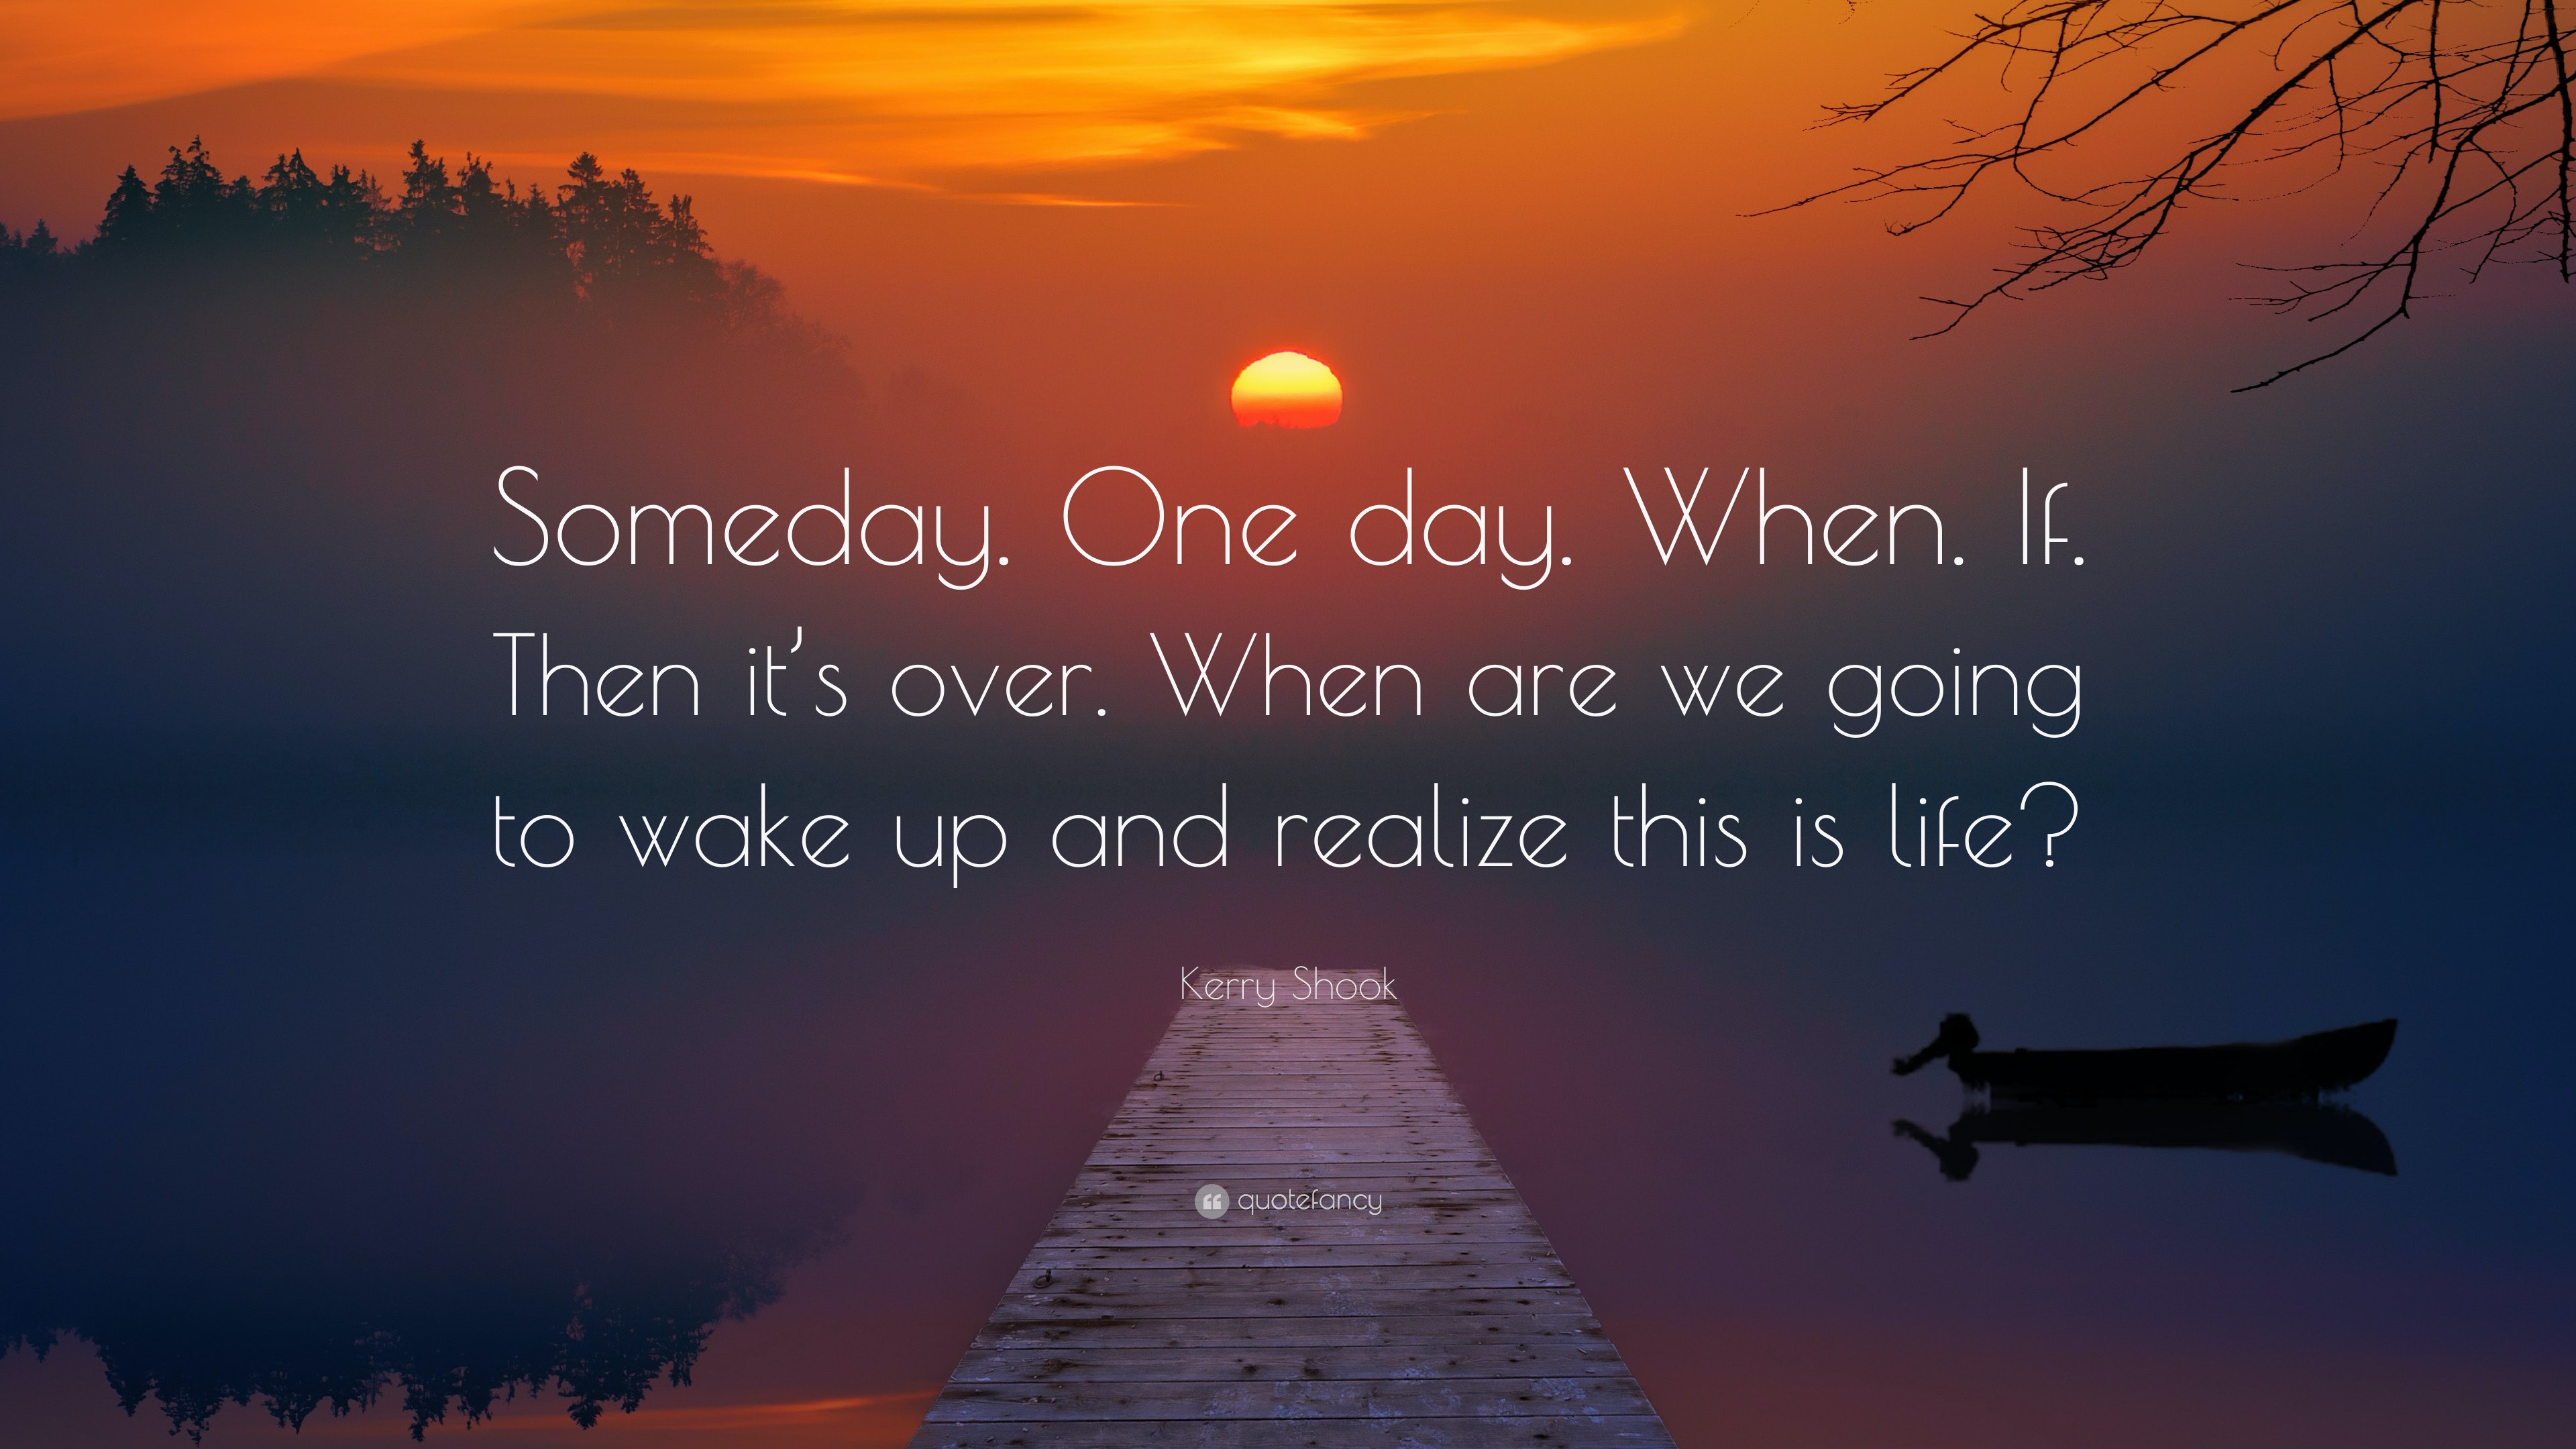 Kerry Shook Quote: “Someday. One day. When. If. Then it’s over. When ...